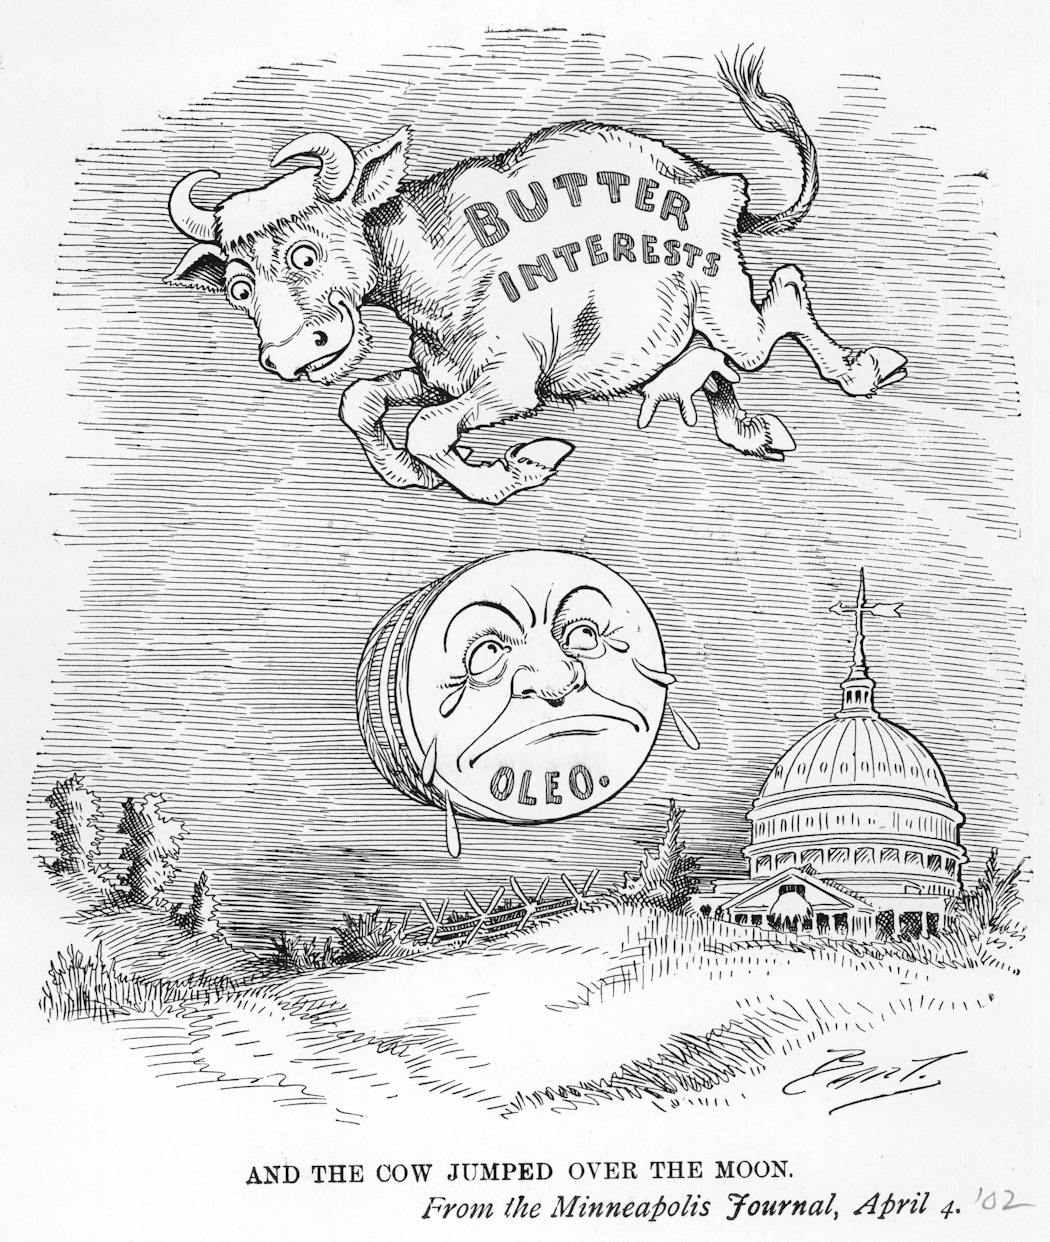 Cartoonist Charles Bartholomew's take on the butter vs. margarine debates. This cartoon appeared in the Minneapolis Journal in 1902.